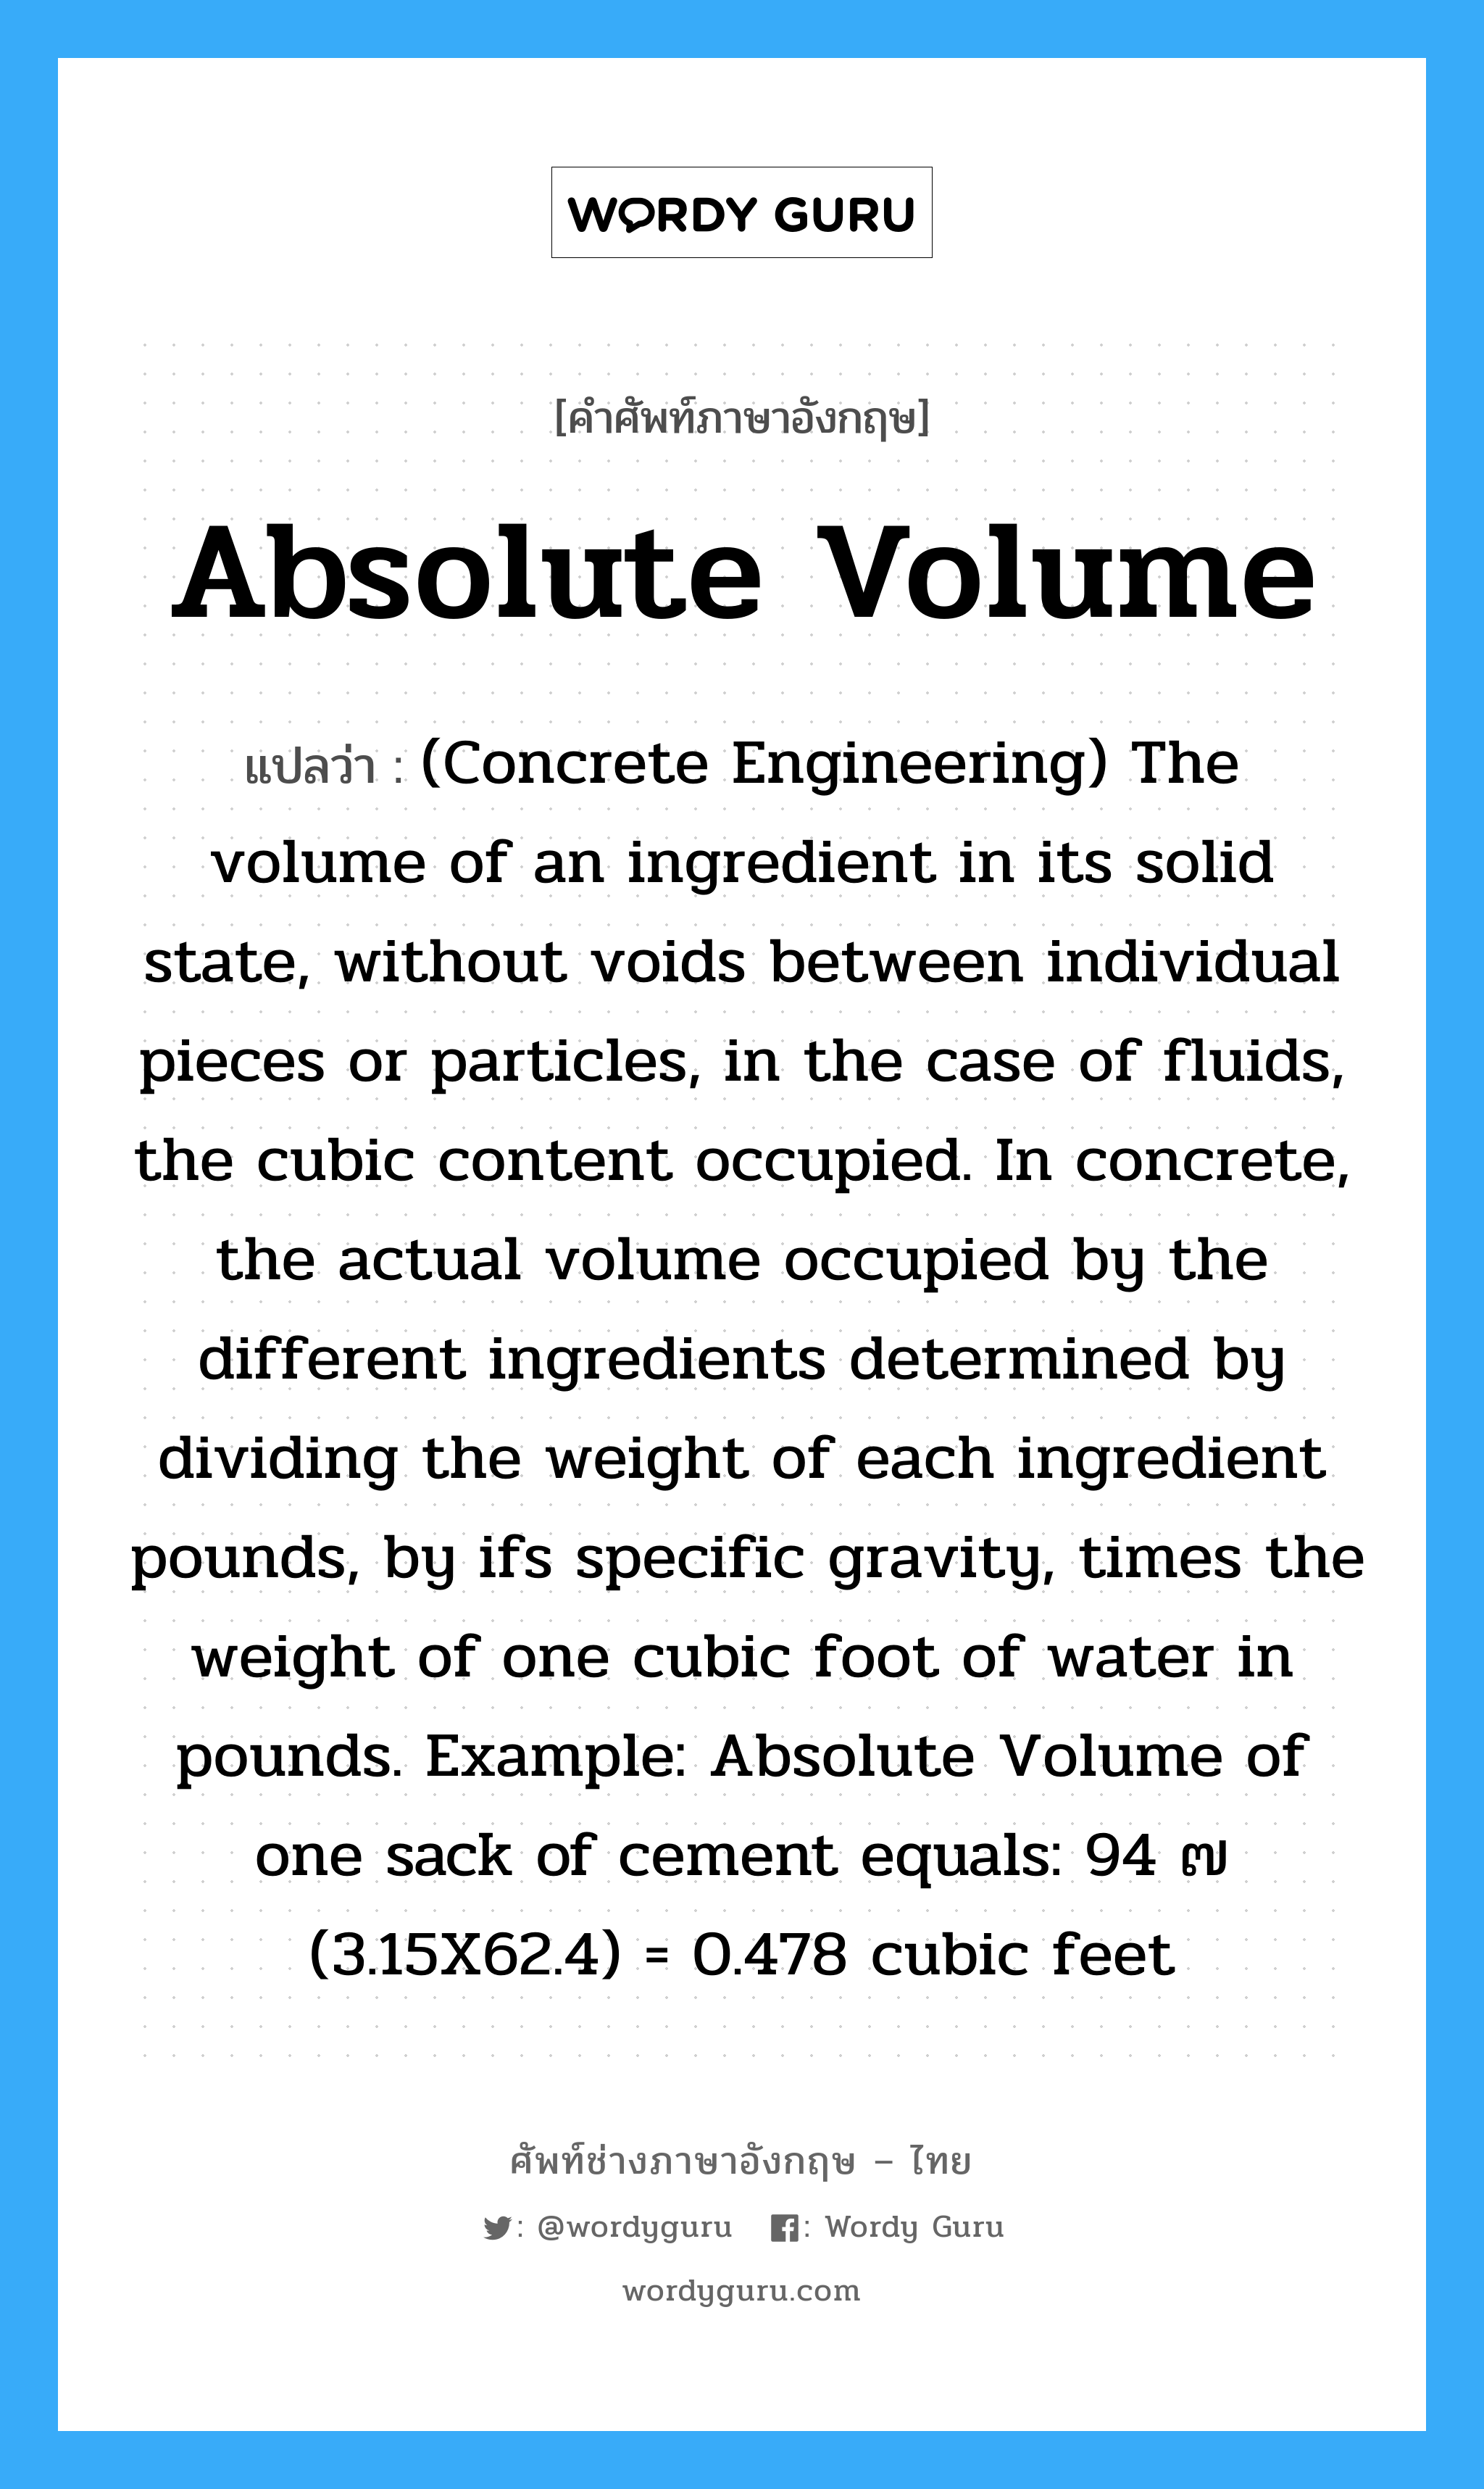 (Concrete Engineering) The volume of an ingredient in its solid state, without voids between individual pieces or particles, in the case of fluids, the cubic content occupied. In concrete, the actual volume occupied by the different ingredients determined by dividing the weight of each ingredient pounds, by ifs specific gravity, times the weight of one cubic foot of water in pounds. Example: Absolute Volume of one sack of cement equals: 94 ๗ (3.15X62.4) = 0.478 cubic feet ภาษาอังกฤษ?, คำศัพท์ช่างภาษาอังกฤษ - ไทย (Concrete Engineering) The volume of an ingredient in its solid state, without voids between individual pieces or particles, in the case of fluids, the cubic content occupied. In concrete, the actual volume occupied by the different ingredients determined by dividing the weight of each ingredient pounds, by ifs specific gravity, times the weight of one cubic foot of water in pounds. Example: Absolute Volume of one sack of cement equals: 94 ๗ (3.15X62.4) = 0.478 cubic feet คำศัพท์ภาษาอังกฤษ (Concrete Engineering) The volume of an ingredient in its solid state, without voids between individual pieces or particles, in the case of fluids, the cubic content occupied. In concrete, the actual volume occupied by the different ingredients determined by dividing the weight of each ingredient pounds, by ifs specific gravity, times the weight of one cubic foot of water in pounds. Example: Absolute Volume of one sack of cement equals: 94 ๗ (3.15X62.4) = 0.478 cubic feet แปลว่า Absolute Volume